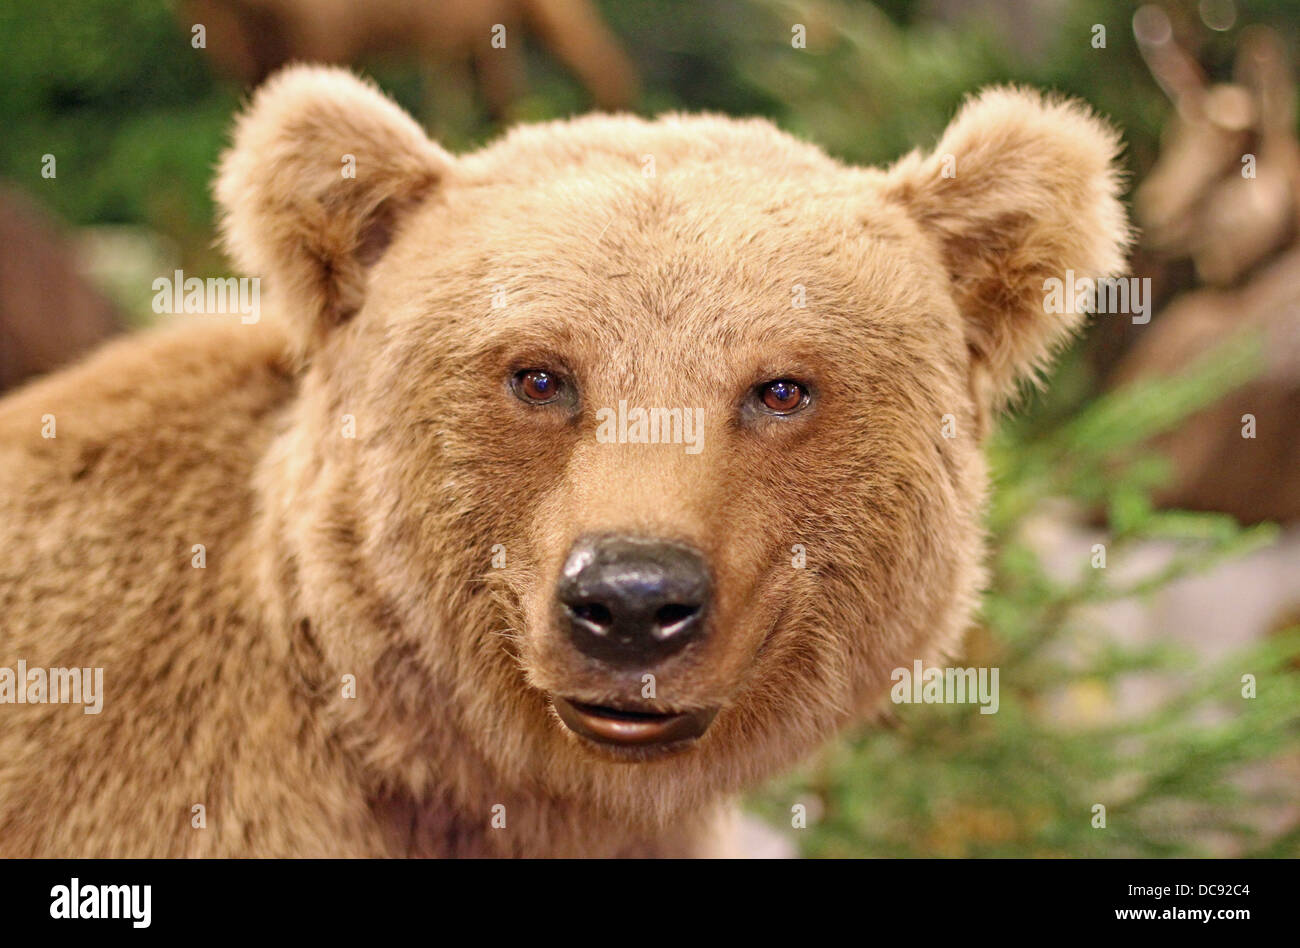 cute face of a brown bear in the middle of the forests Stock Photo